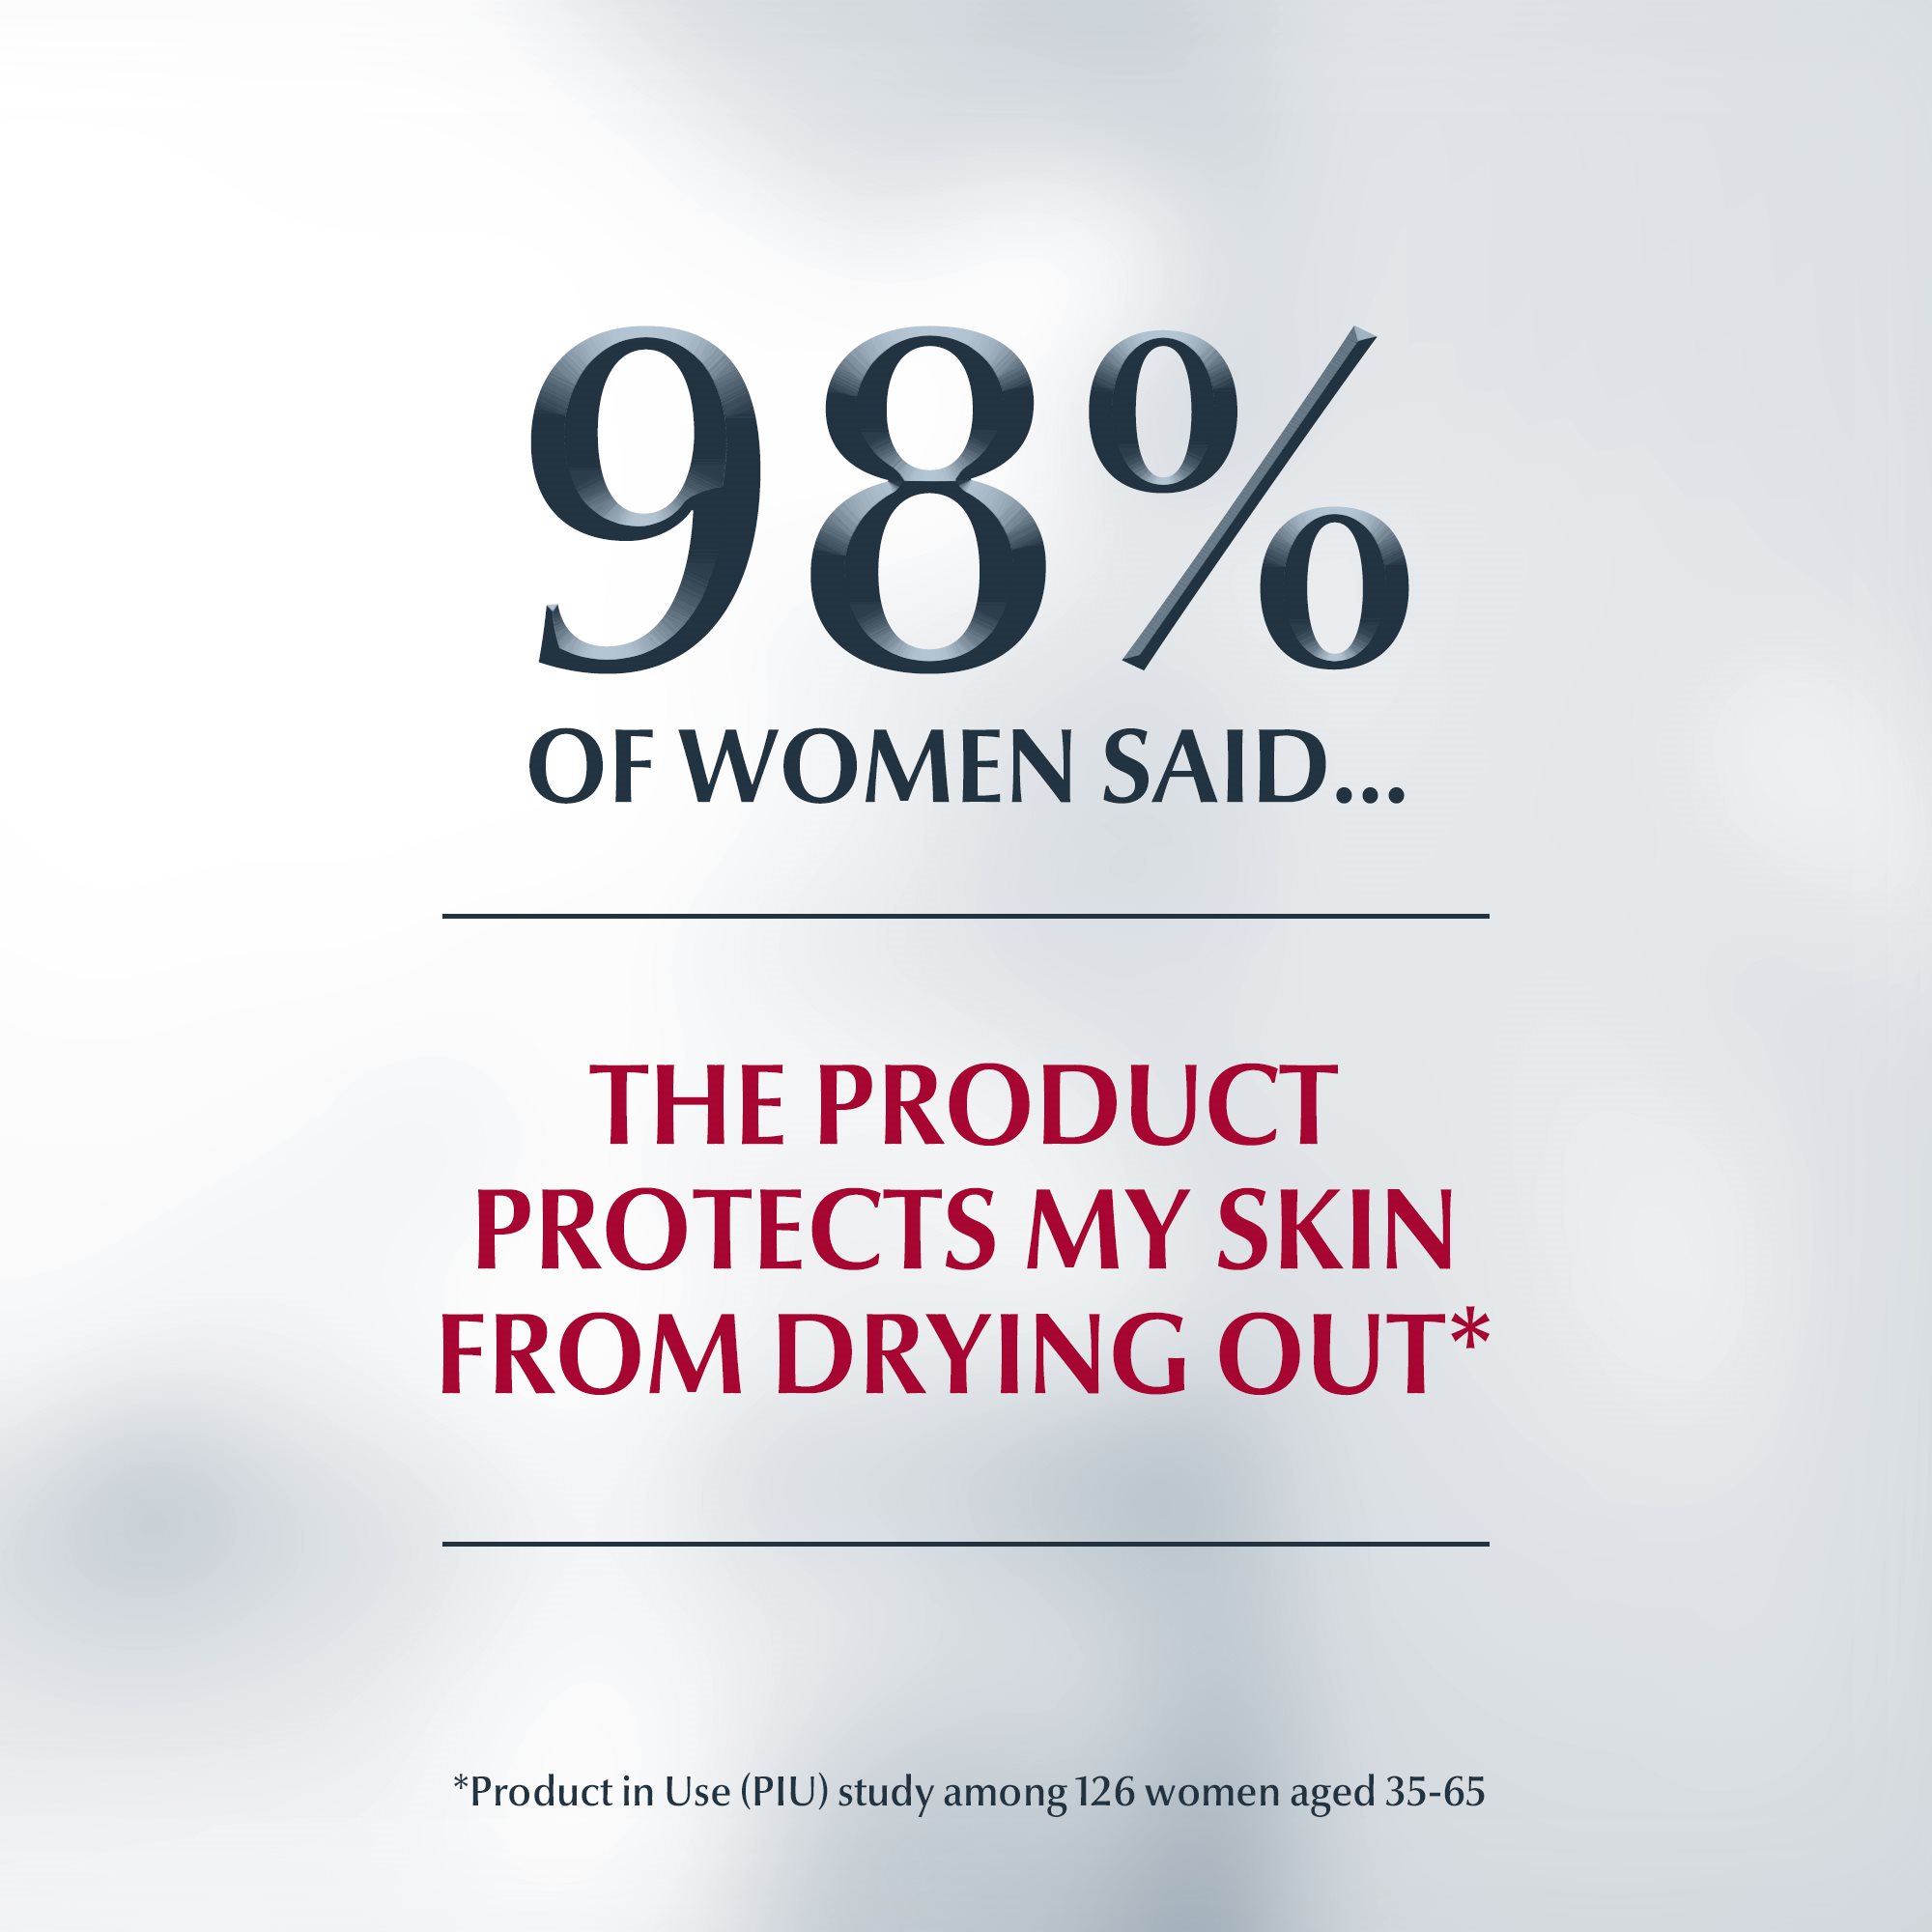 Protects skin from drying out